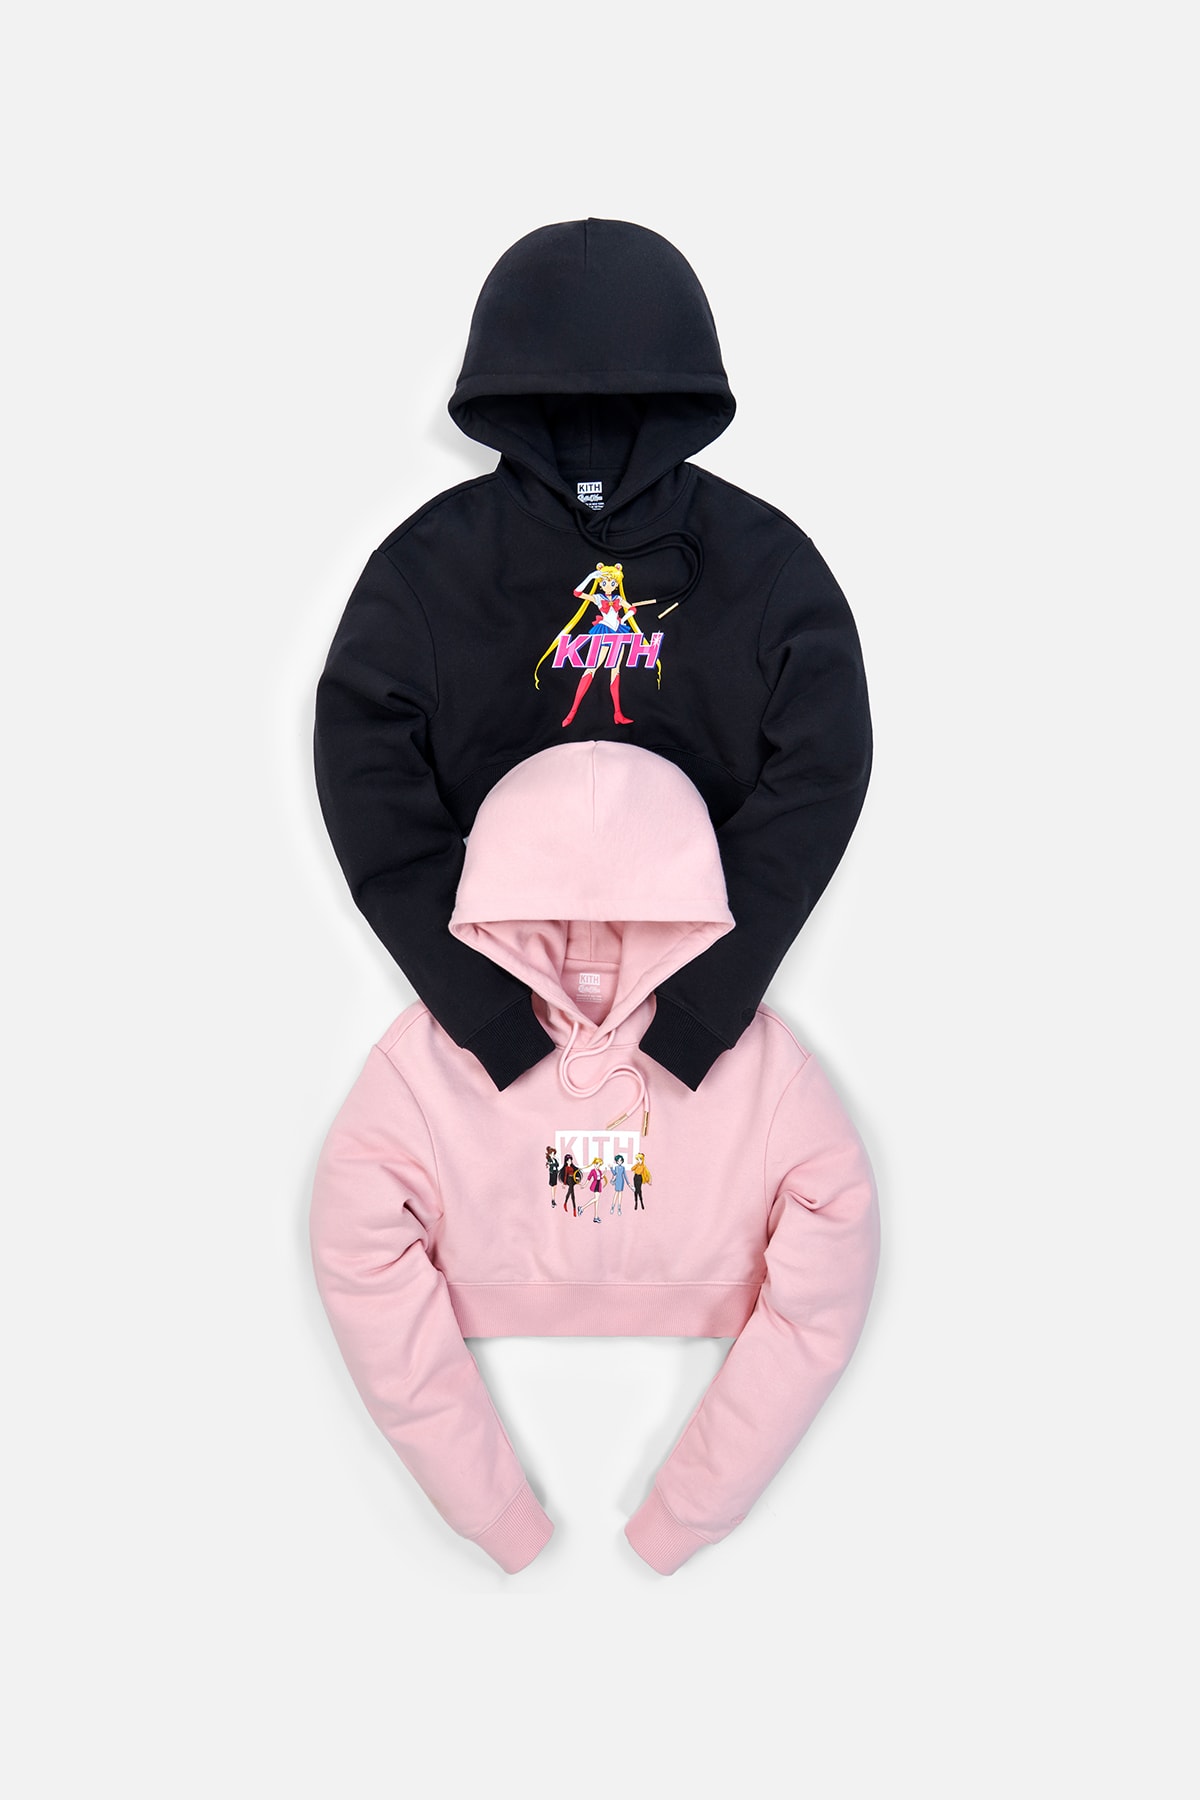 Sailor Moon x KITH Women Collaboration Collection Hoodie Pink Black